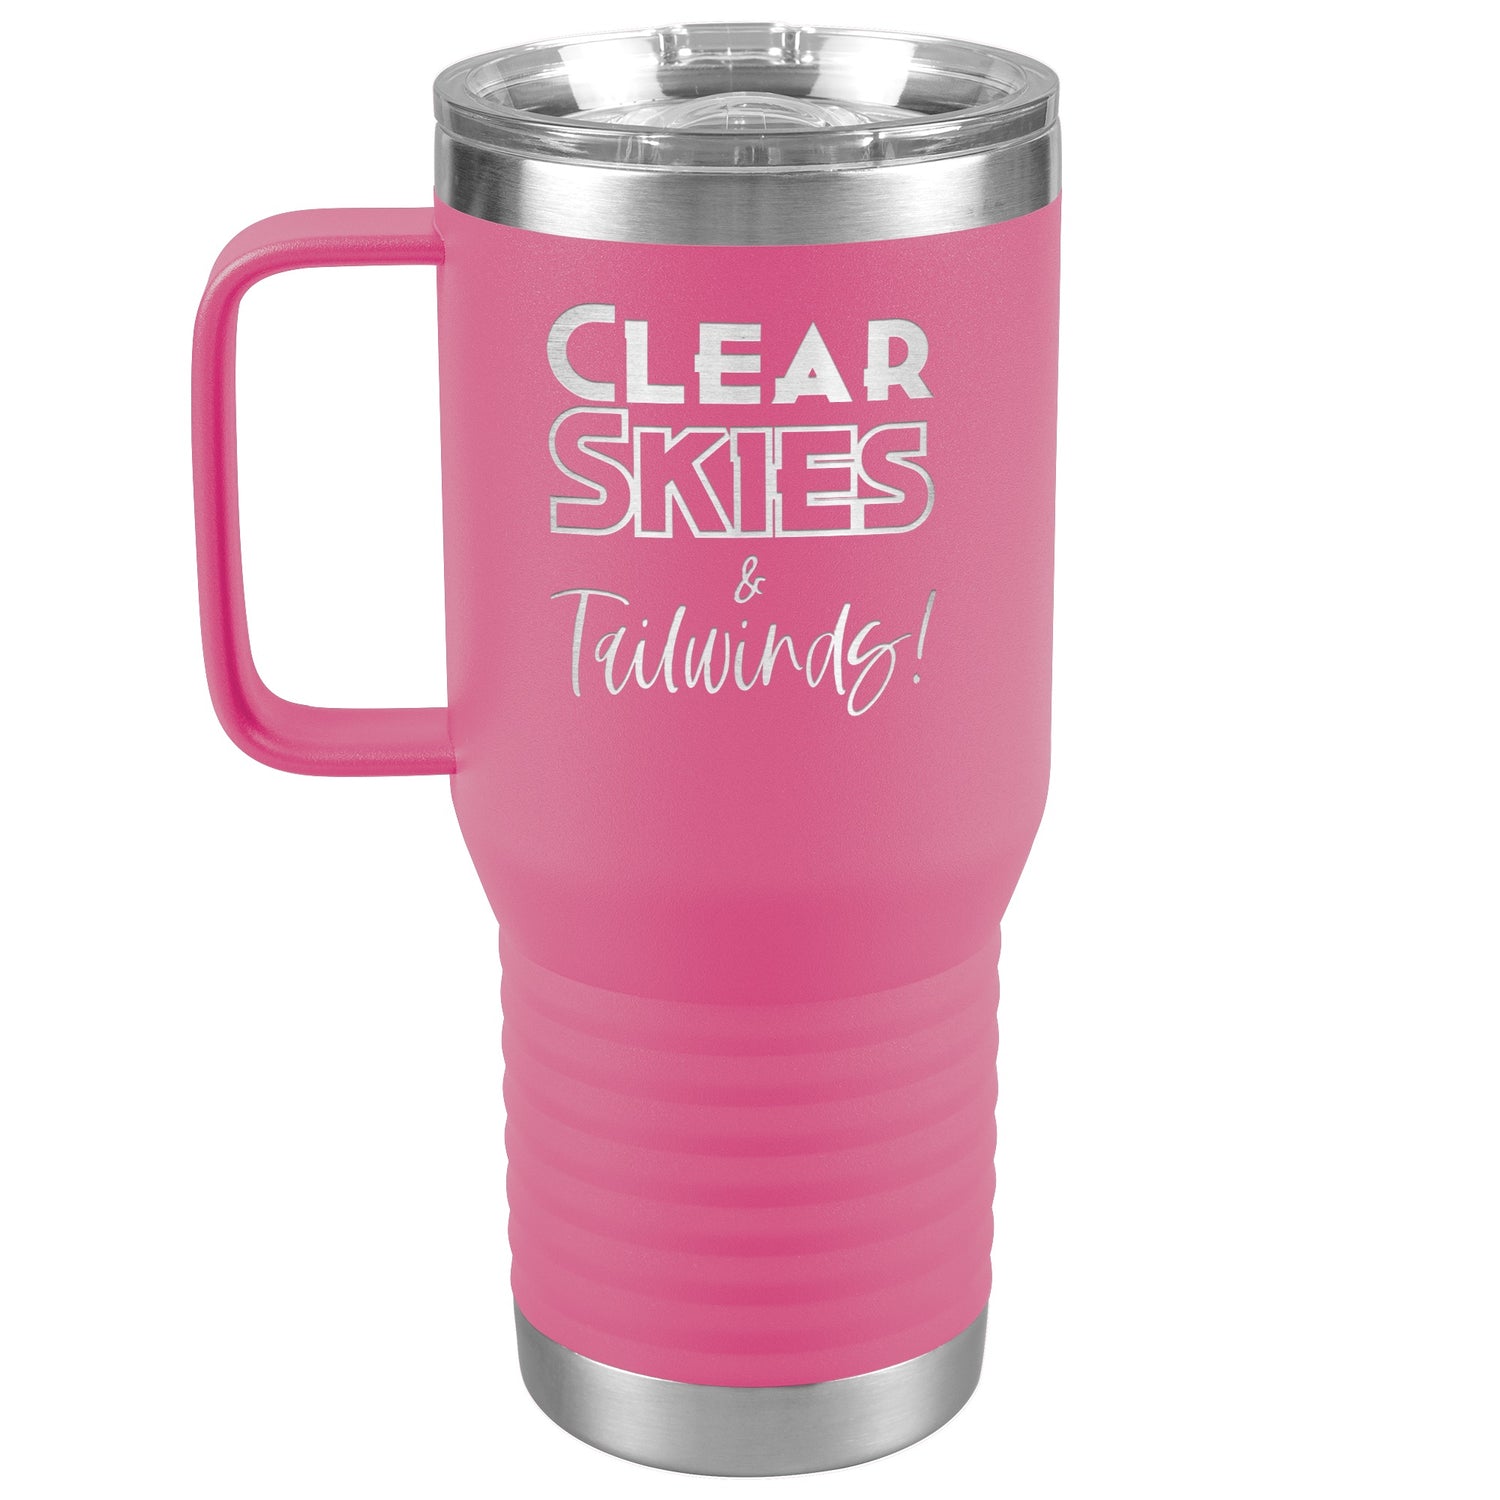 Clear skies & tailwinds! - 20 oz. travel tumbler